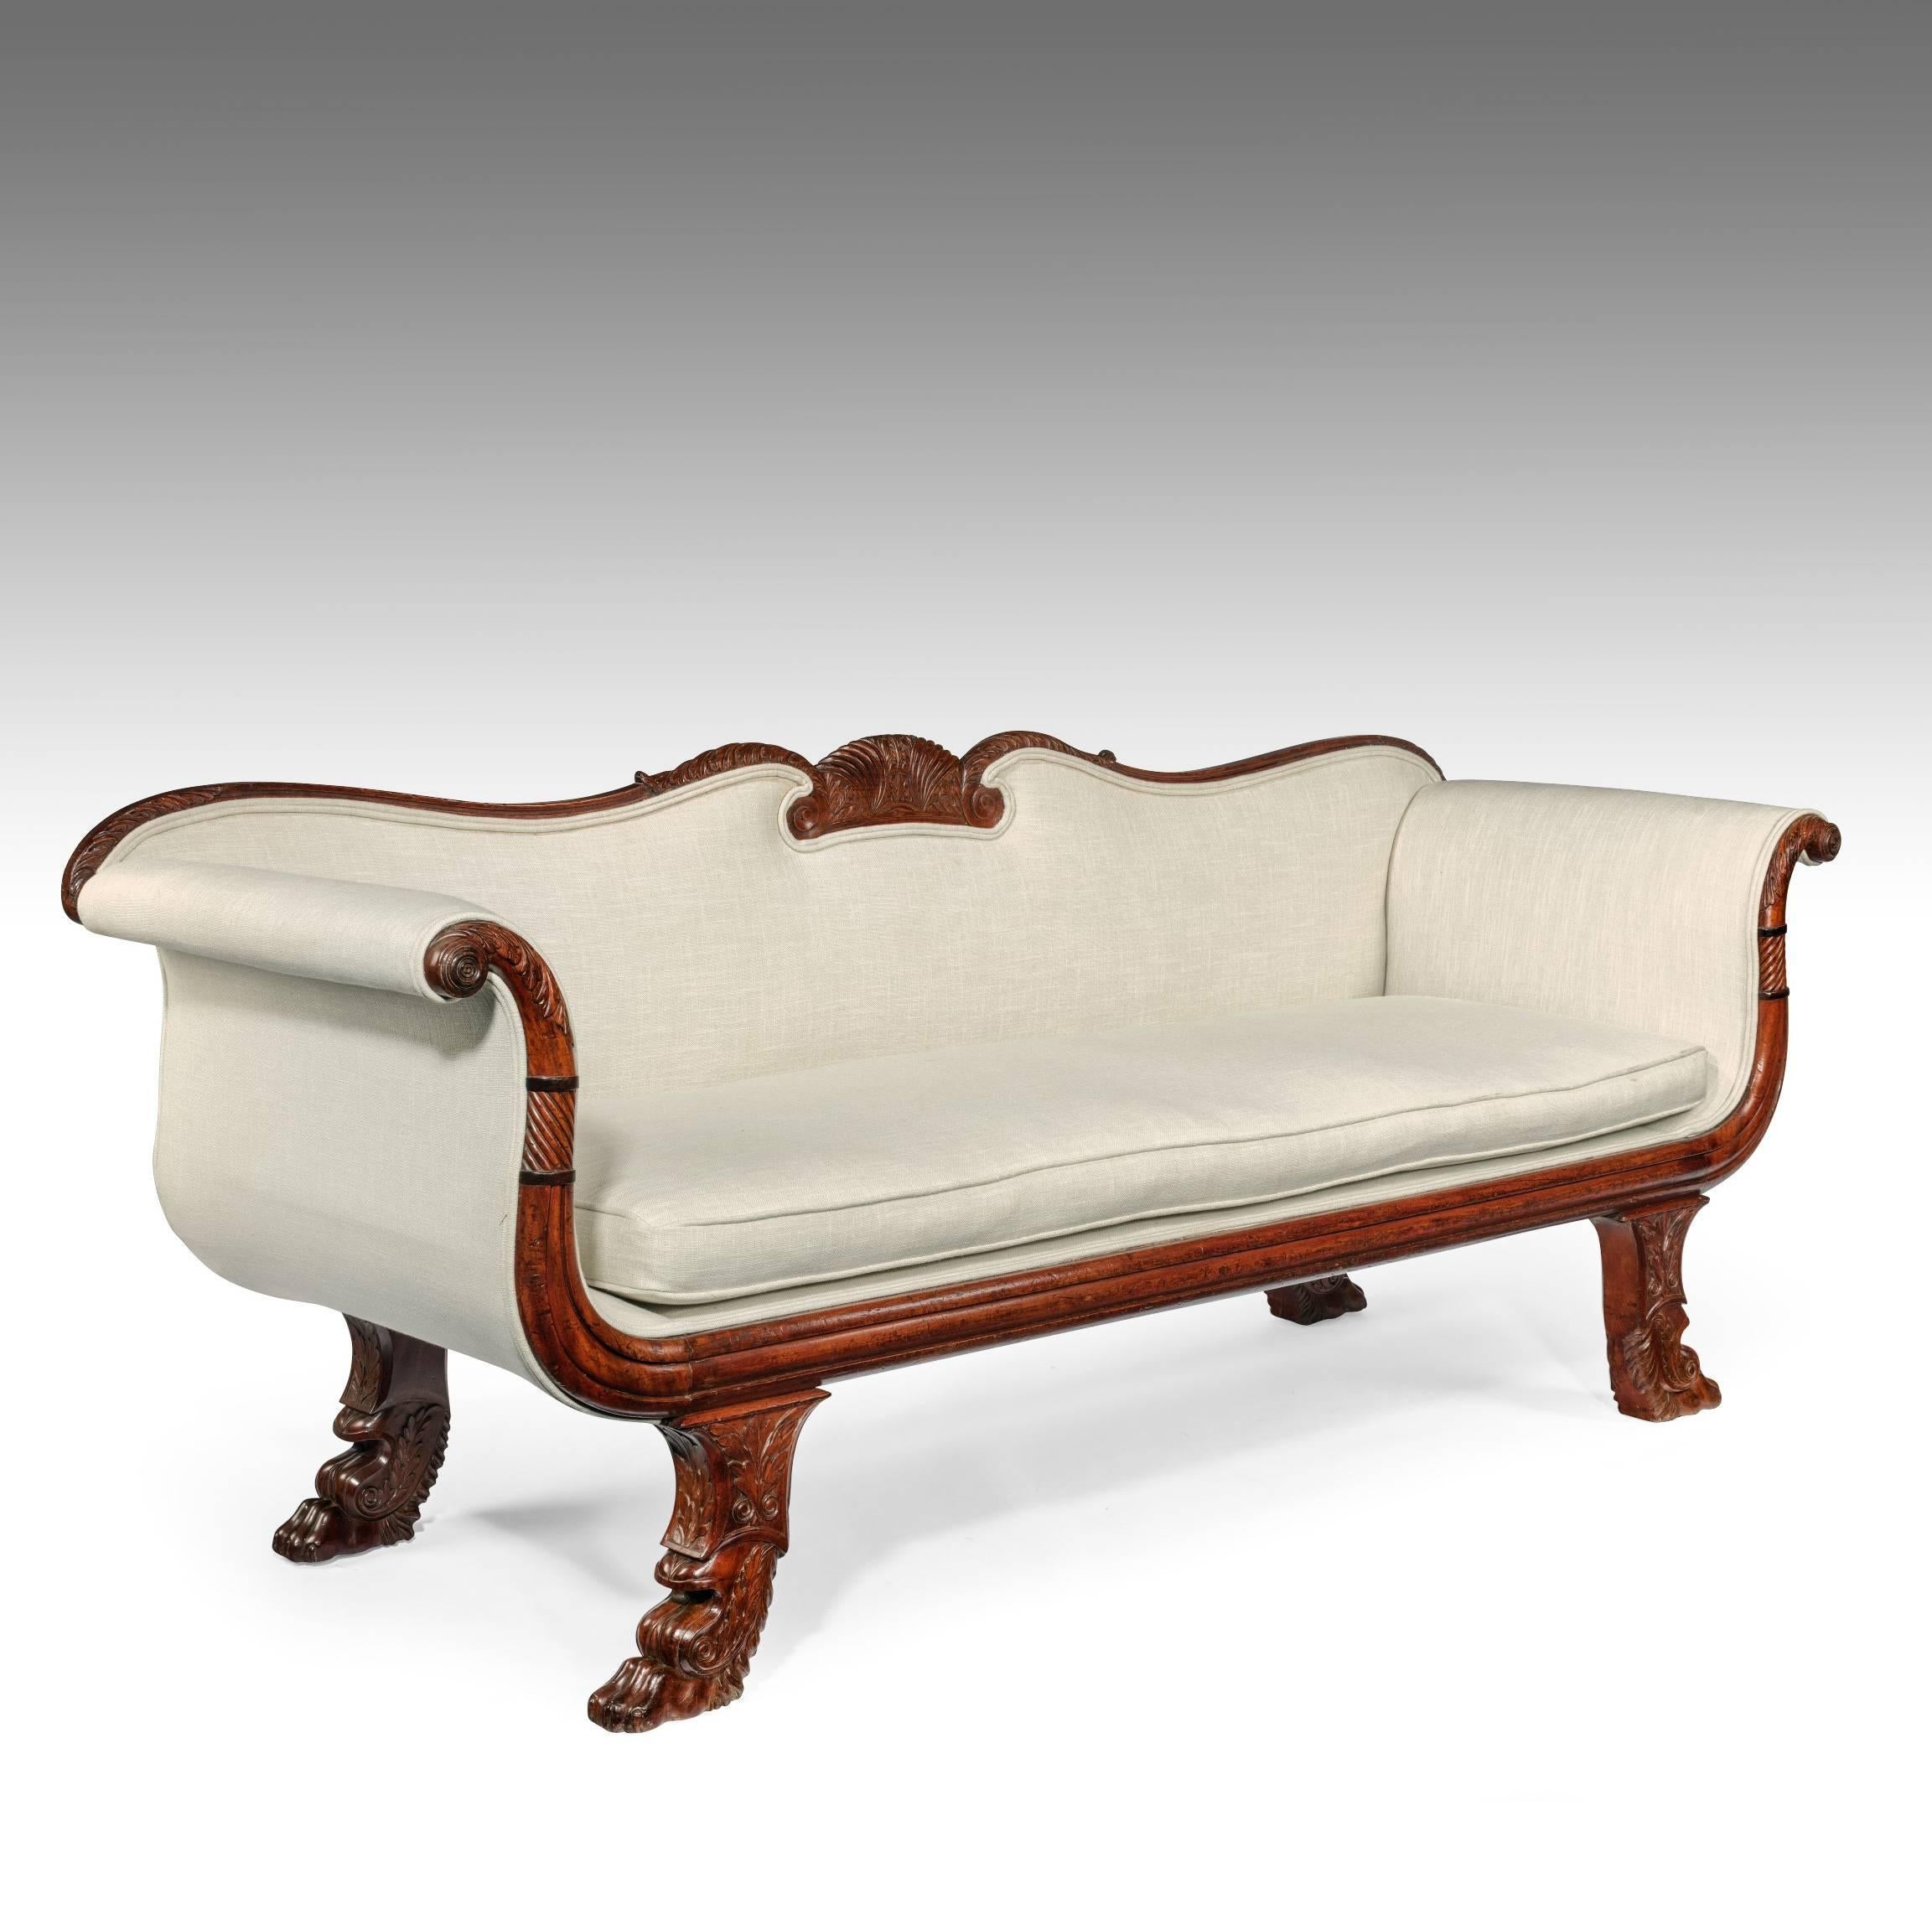 Linen Elegant Early 19th Century Sofa / Couch